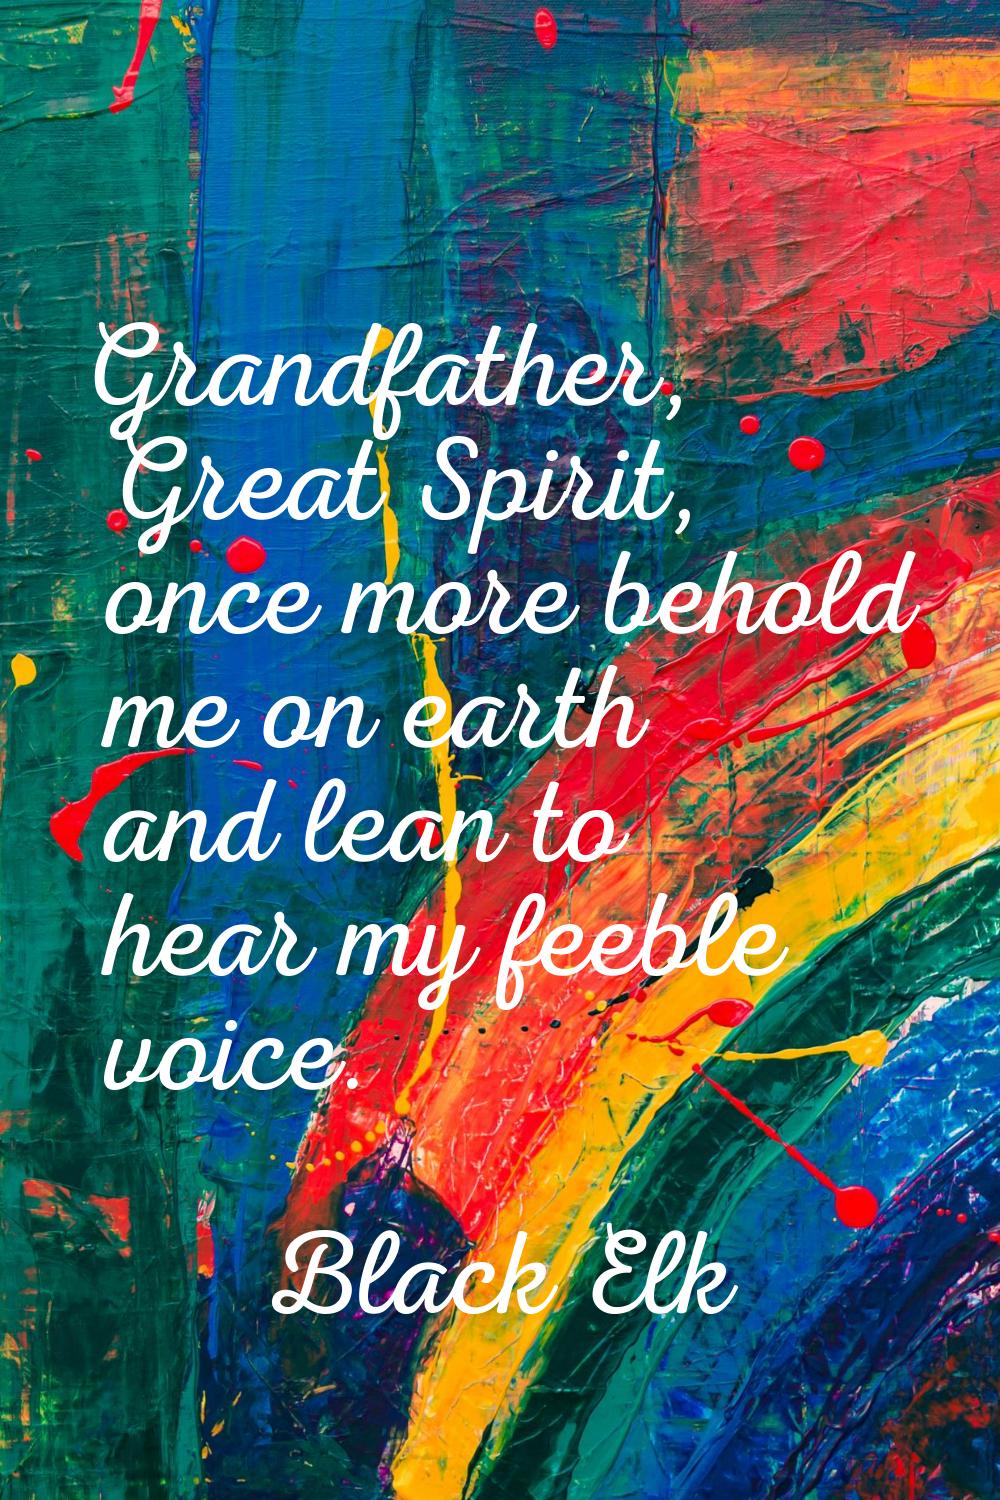 Grandfather, Great Spirit, once more behold me on earth and lean to hear my feeble voice.